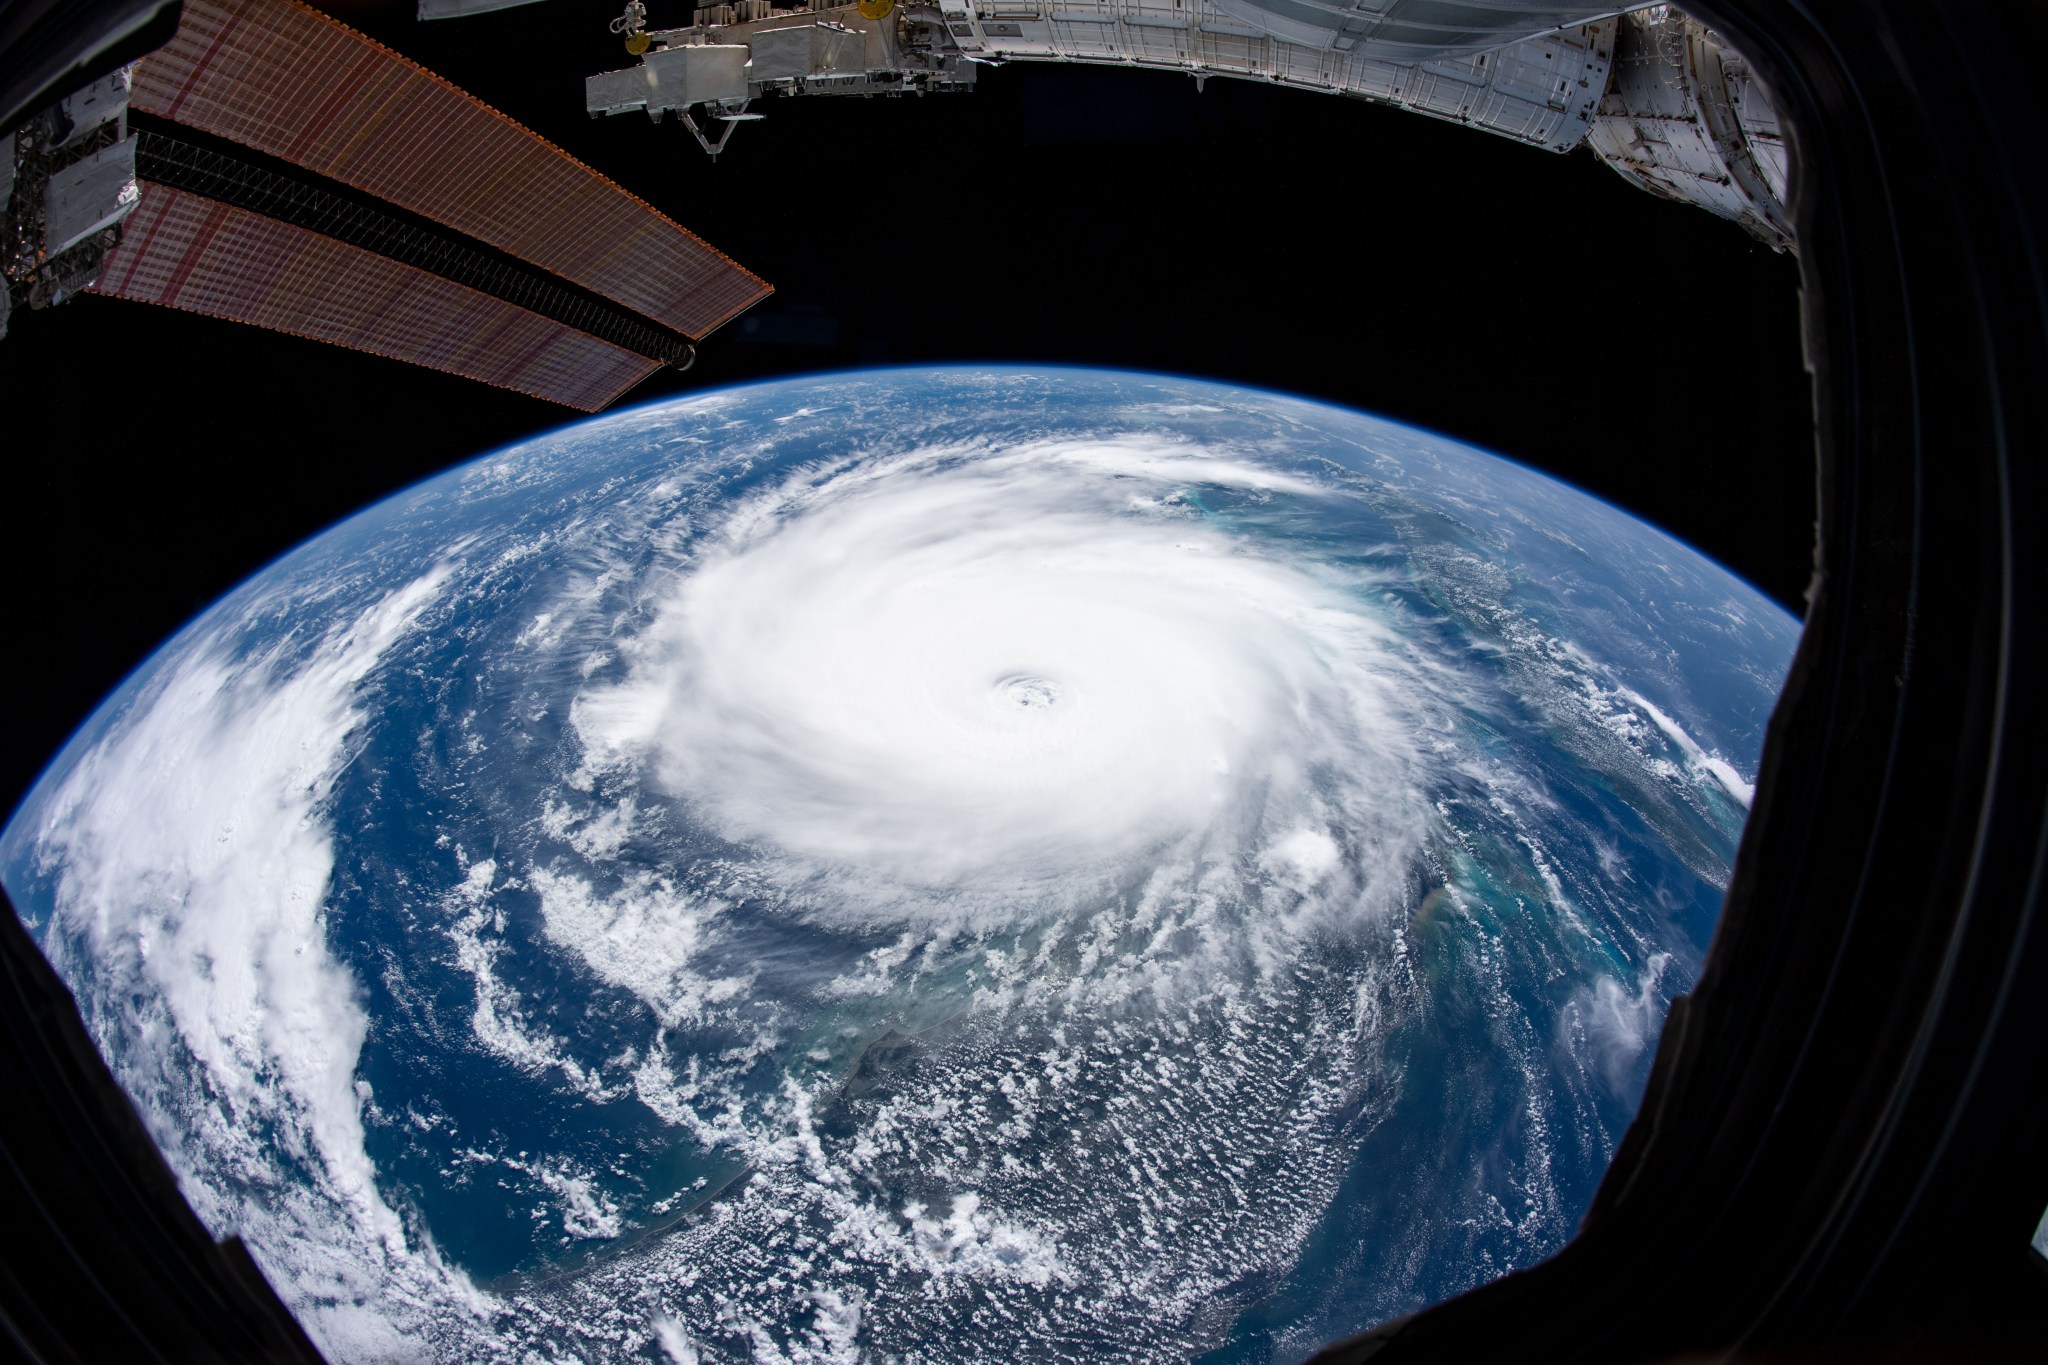 image of Hurricane Dorian as seen from the International Space Station